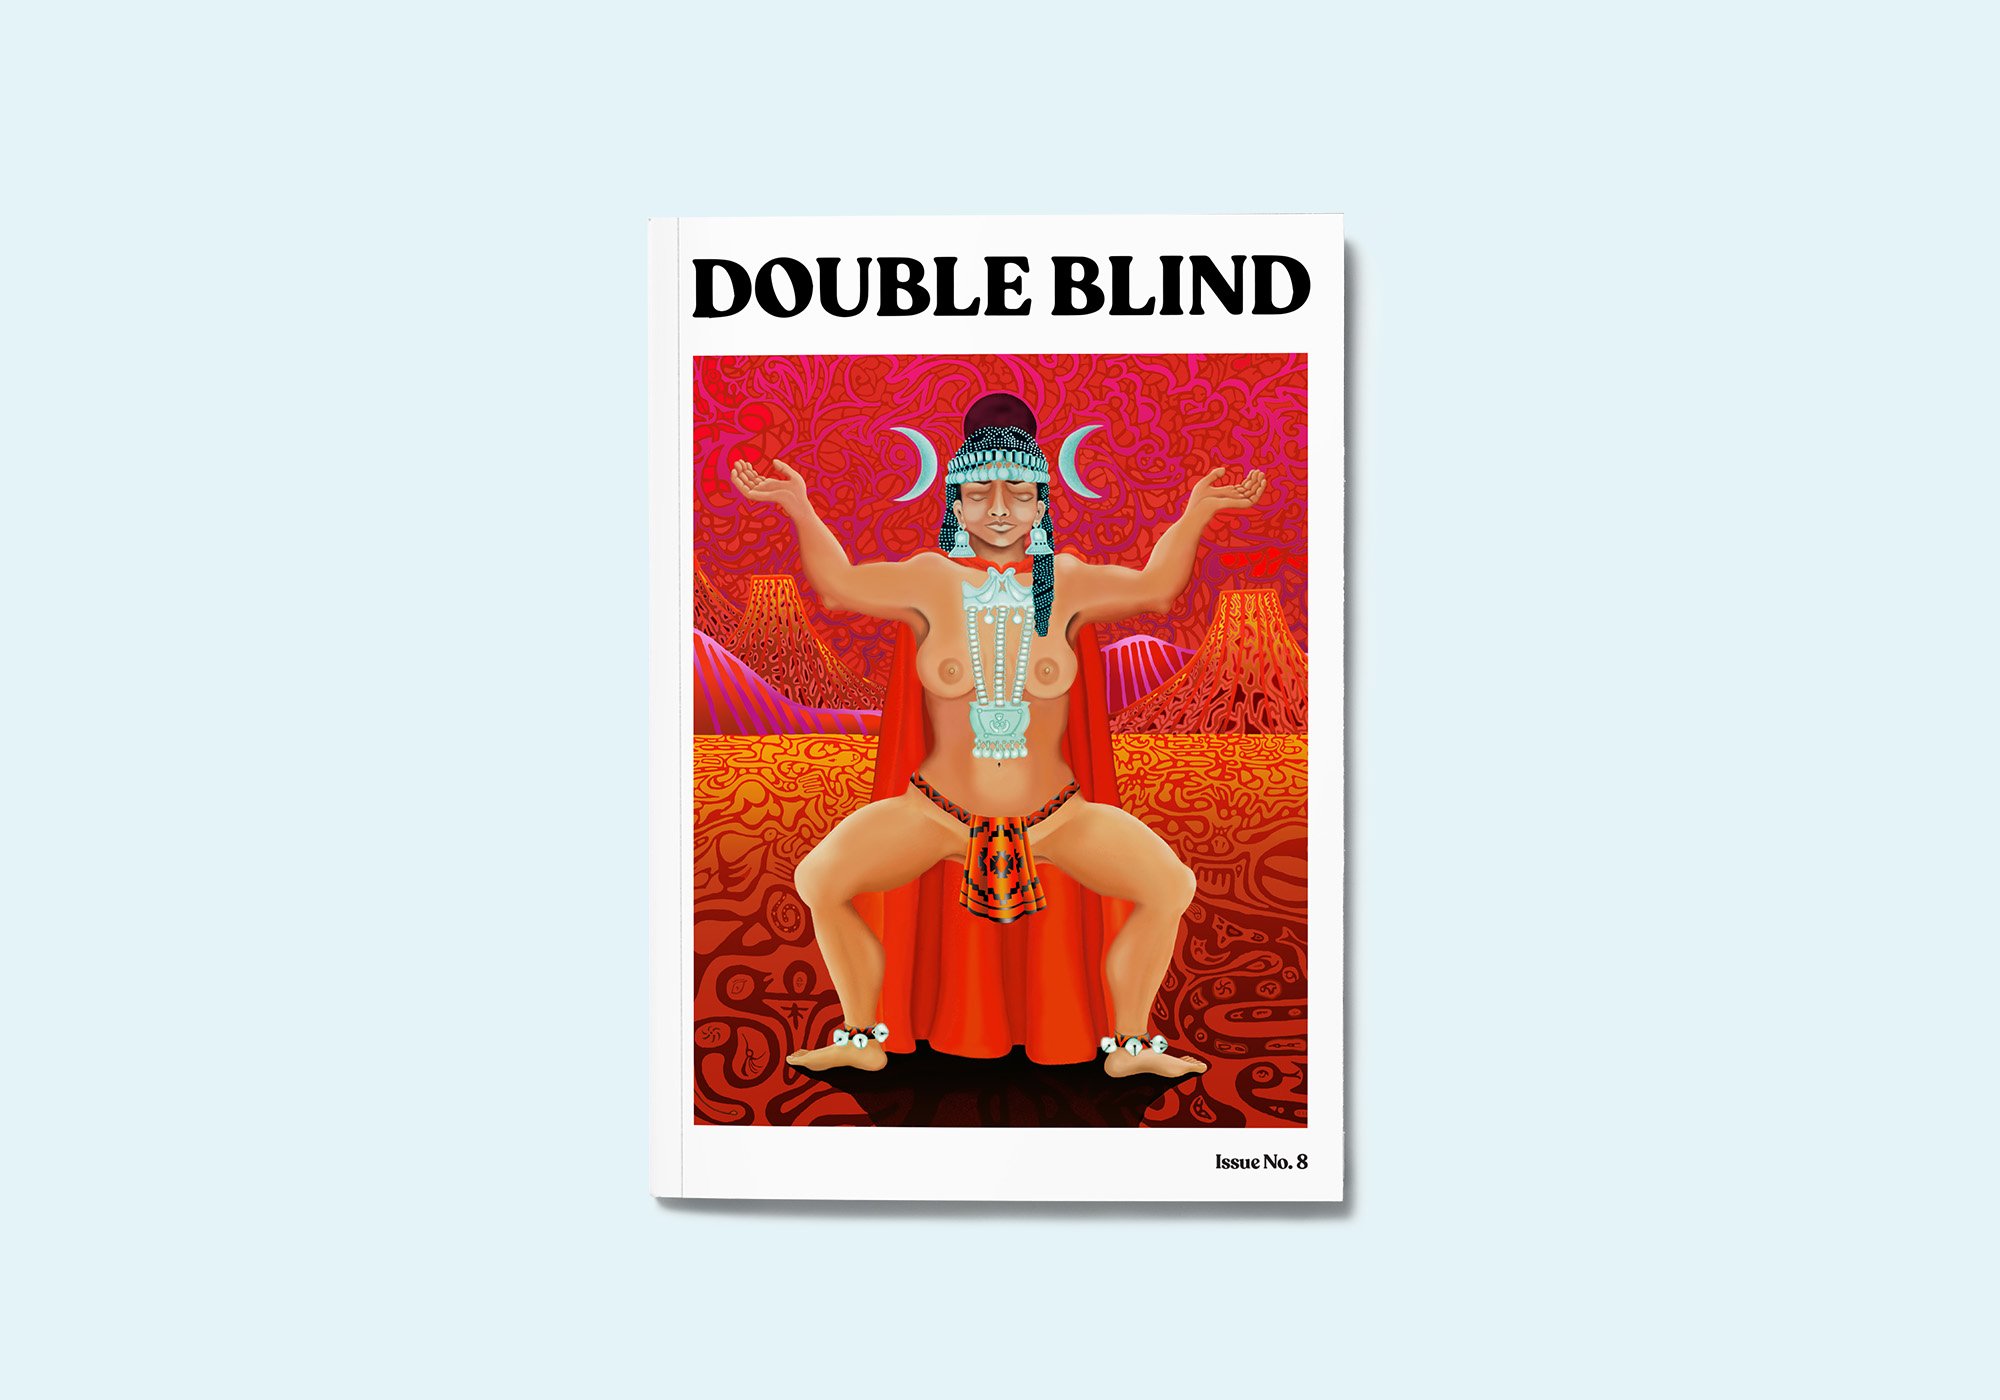 DoubleBlind__0003_issue-8-cover-transparent.jpg